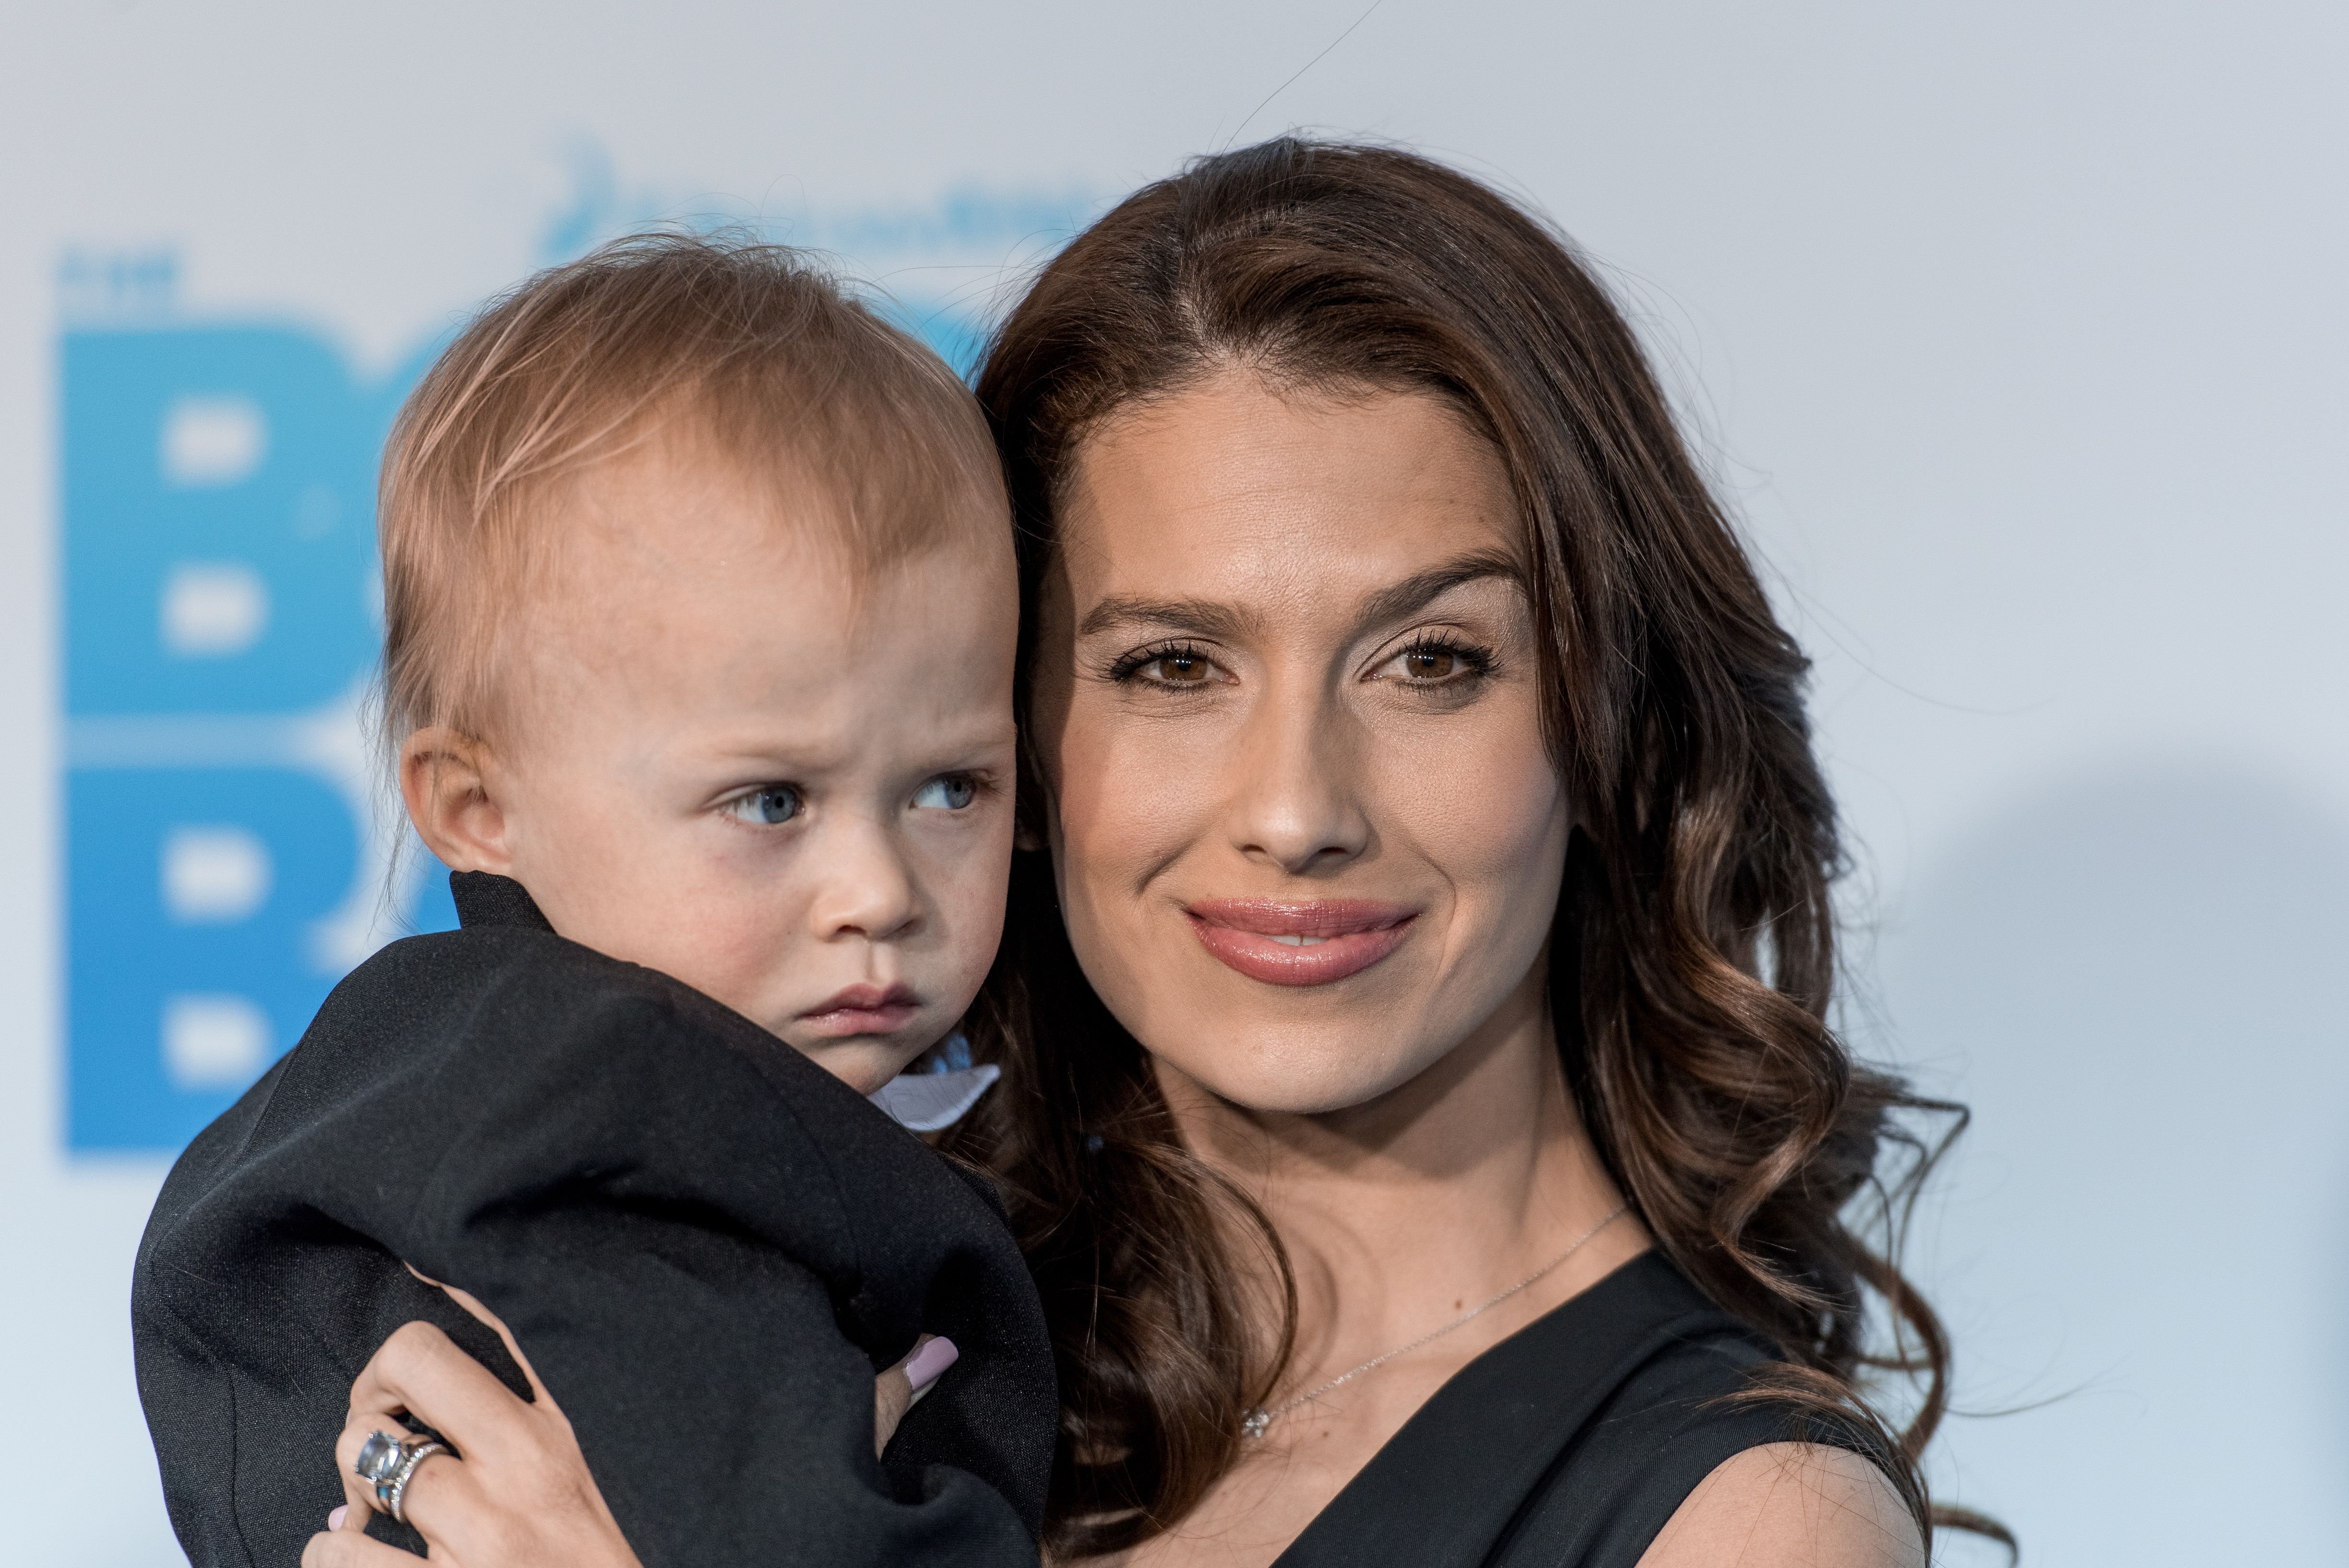 Rafael Thomas Baldwin and his mom, Hilaria Baldwin, at the "The Boss Baby" New York Premiere at AMC Loews Lincoln Square 13 theater on March 20, 2017 in New York City. | Source: Getty Images